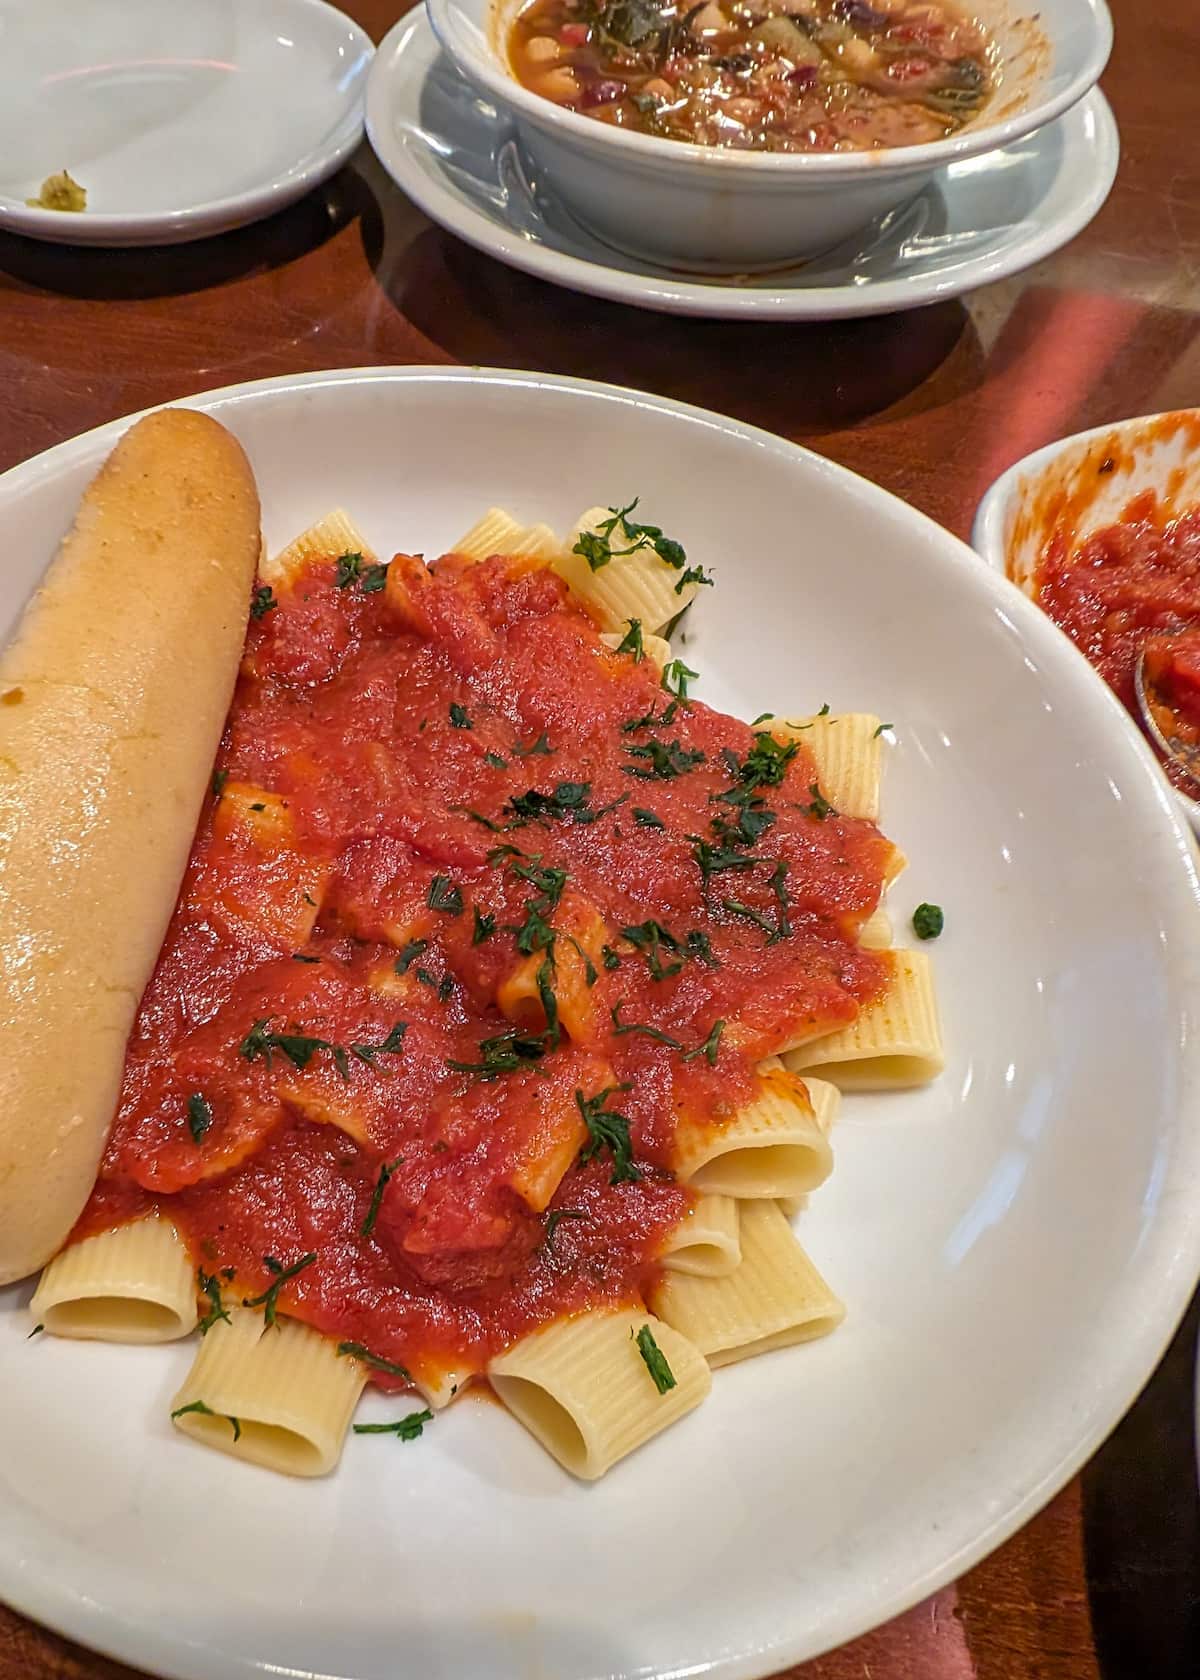 A plate of Olive Garden's pasta with tomato sauce and a breadstick.